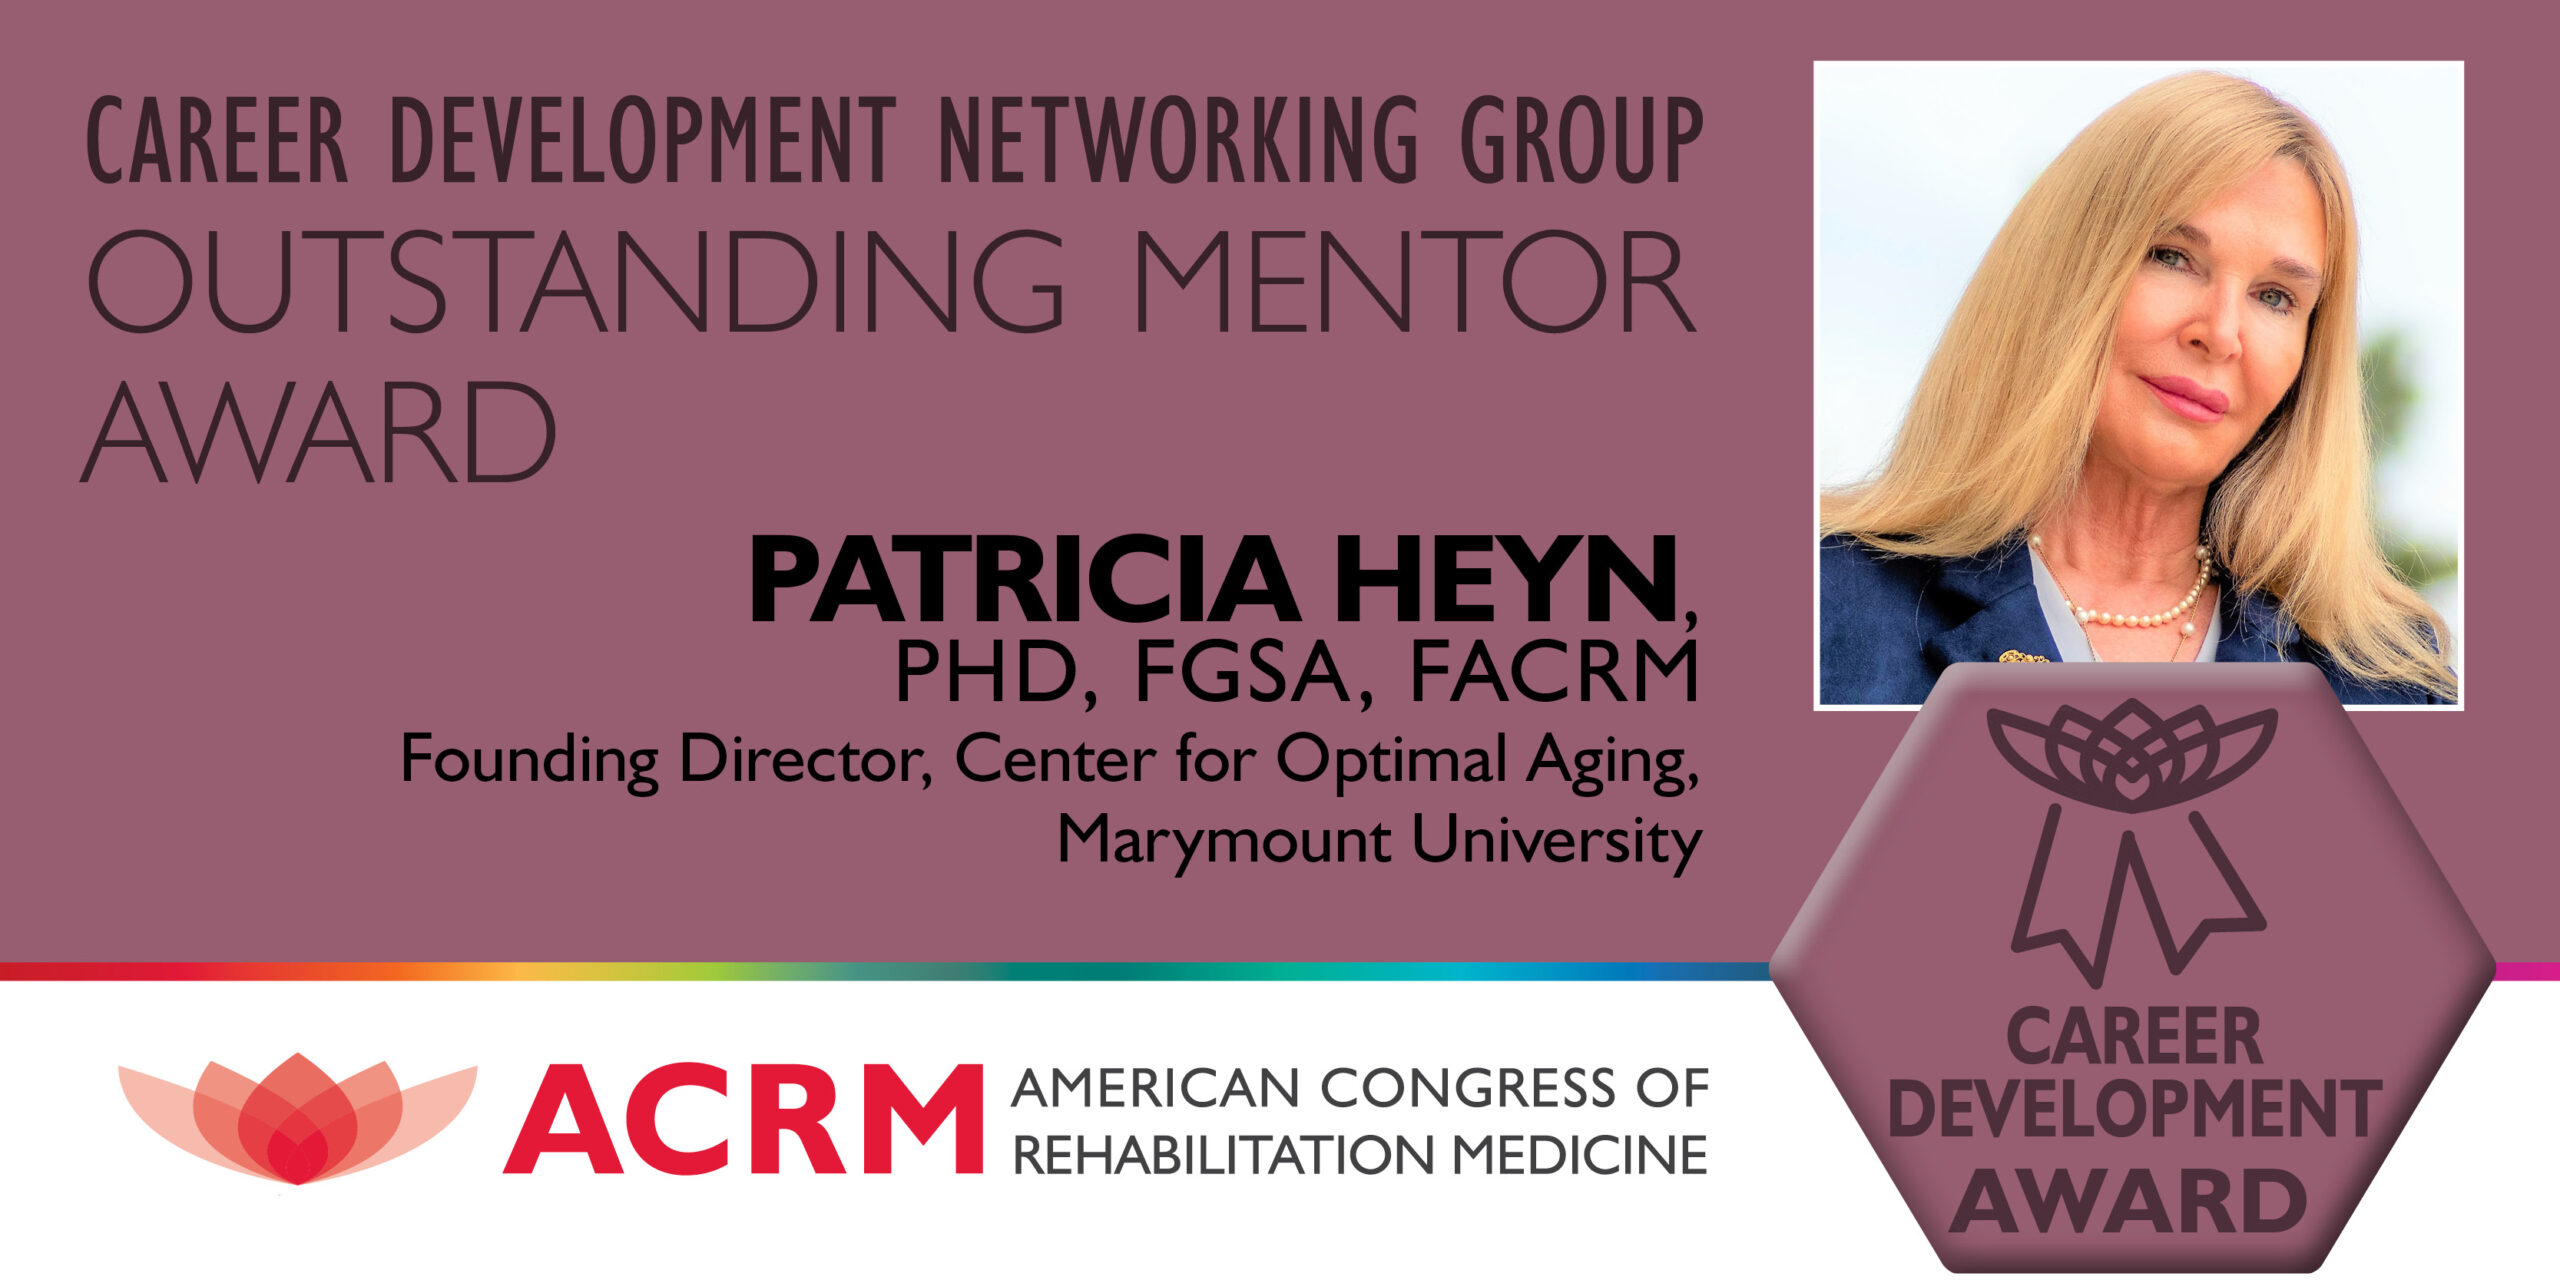 Patricia Heyn received the 2022 ACRM Career Development Outstanding Mentor Award - IMAGE